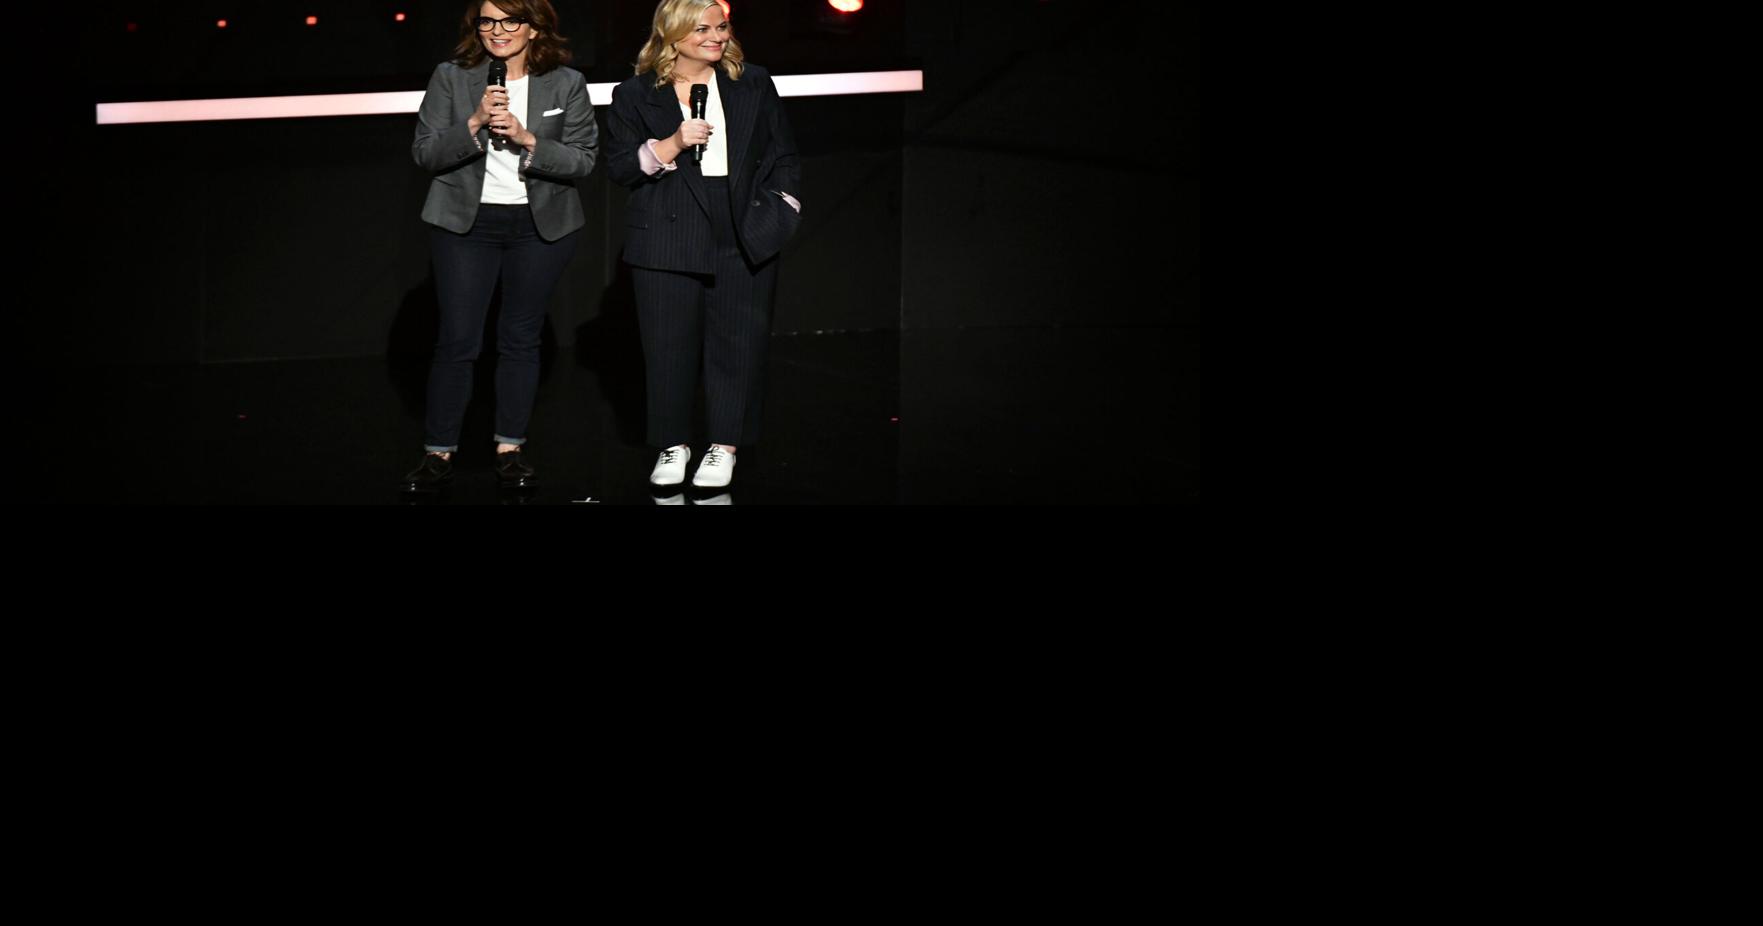 Amy Poehler and Tina Fey are teaming up for a live comedy tour, Entertainment